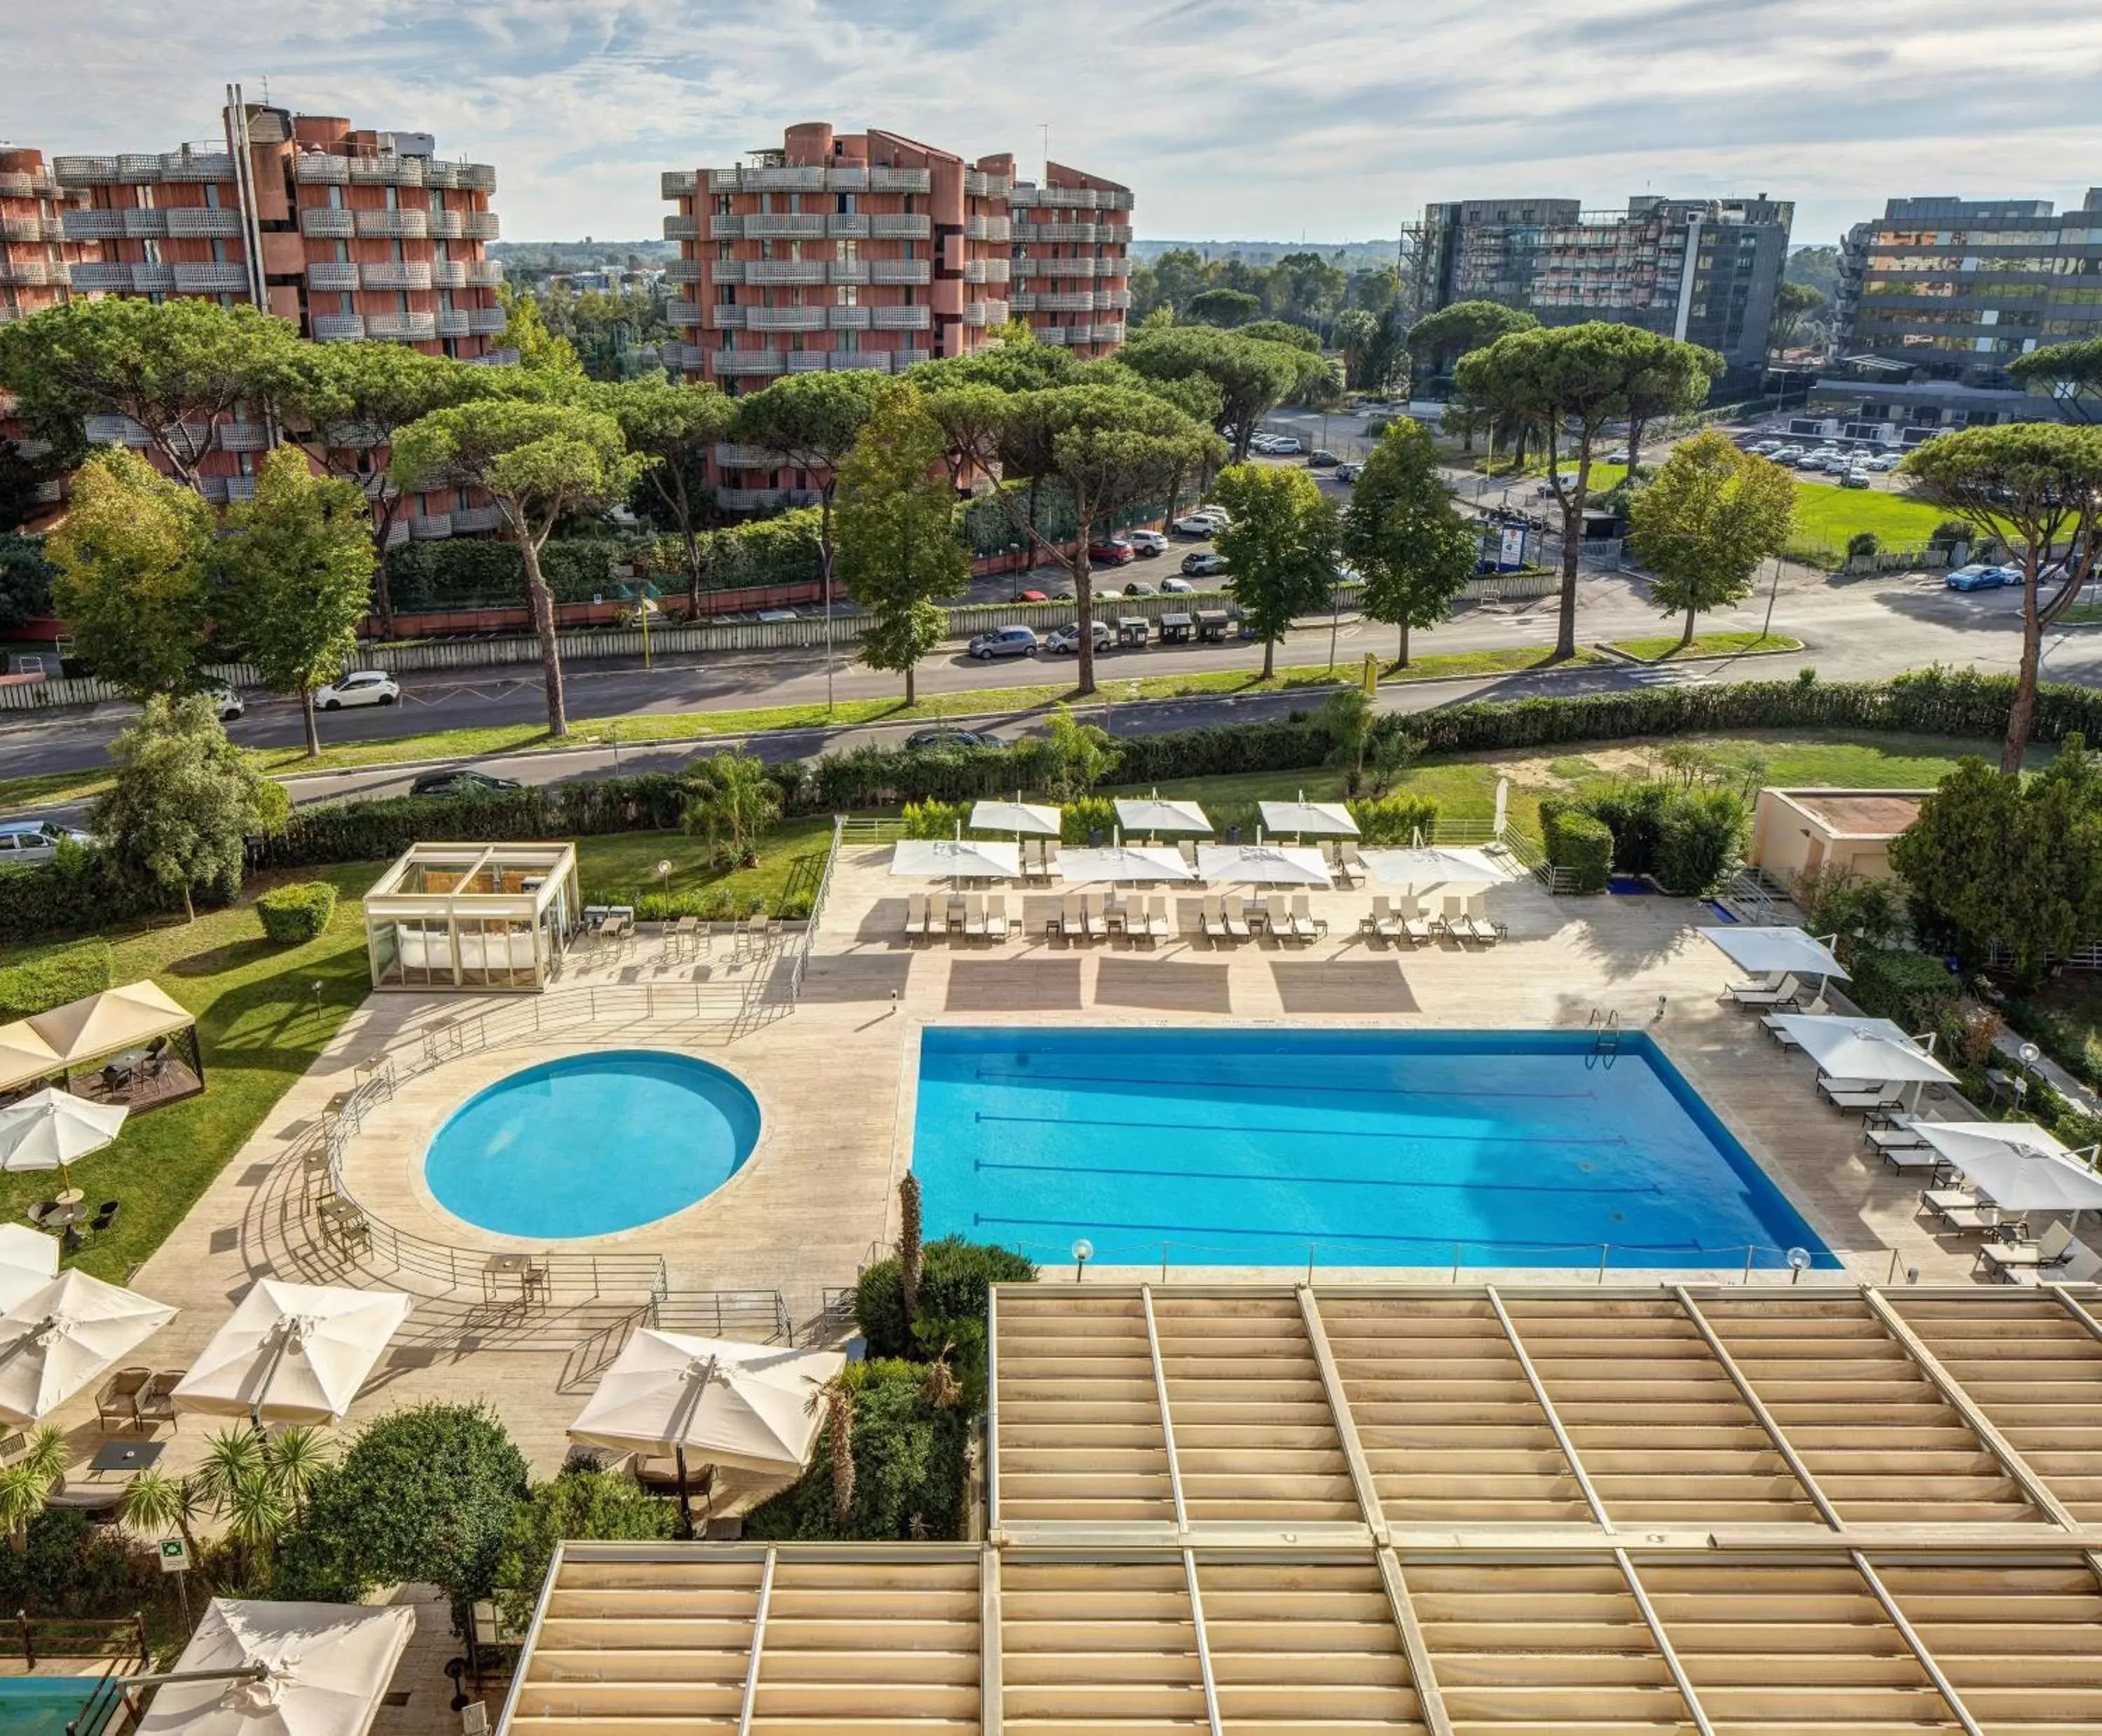 Property building, Pool View in Holiday Inn Rome - Eur Parco Dei Medici, an IHG Hotel